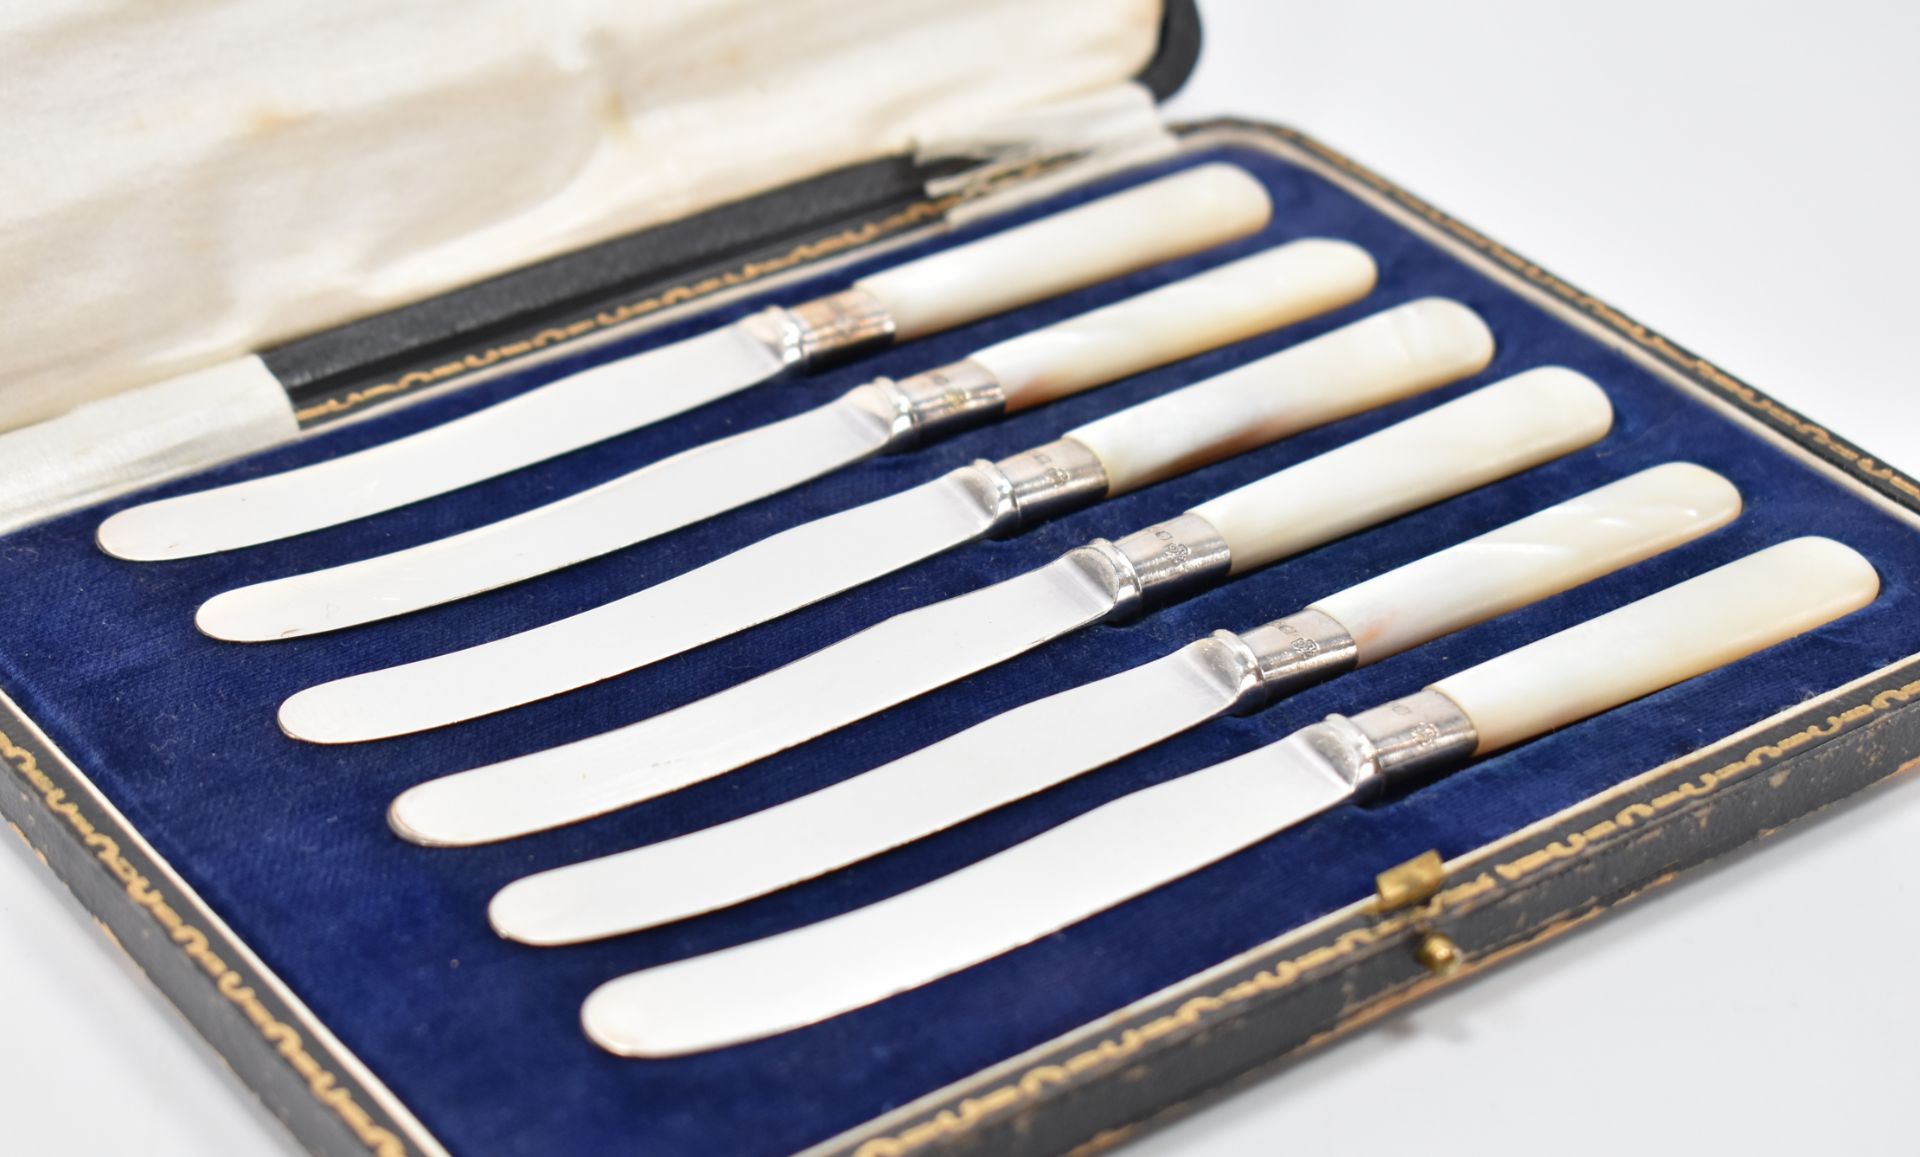 SET OF 6 1920S SILVER HALLMARKED BUTTER KNIVES - Image 2 of 5